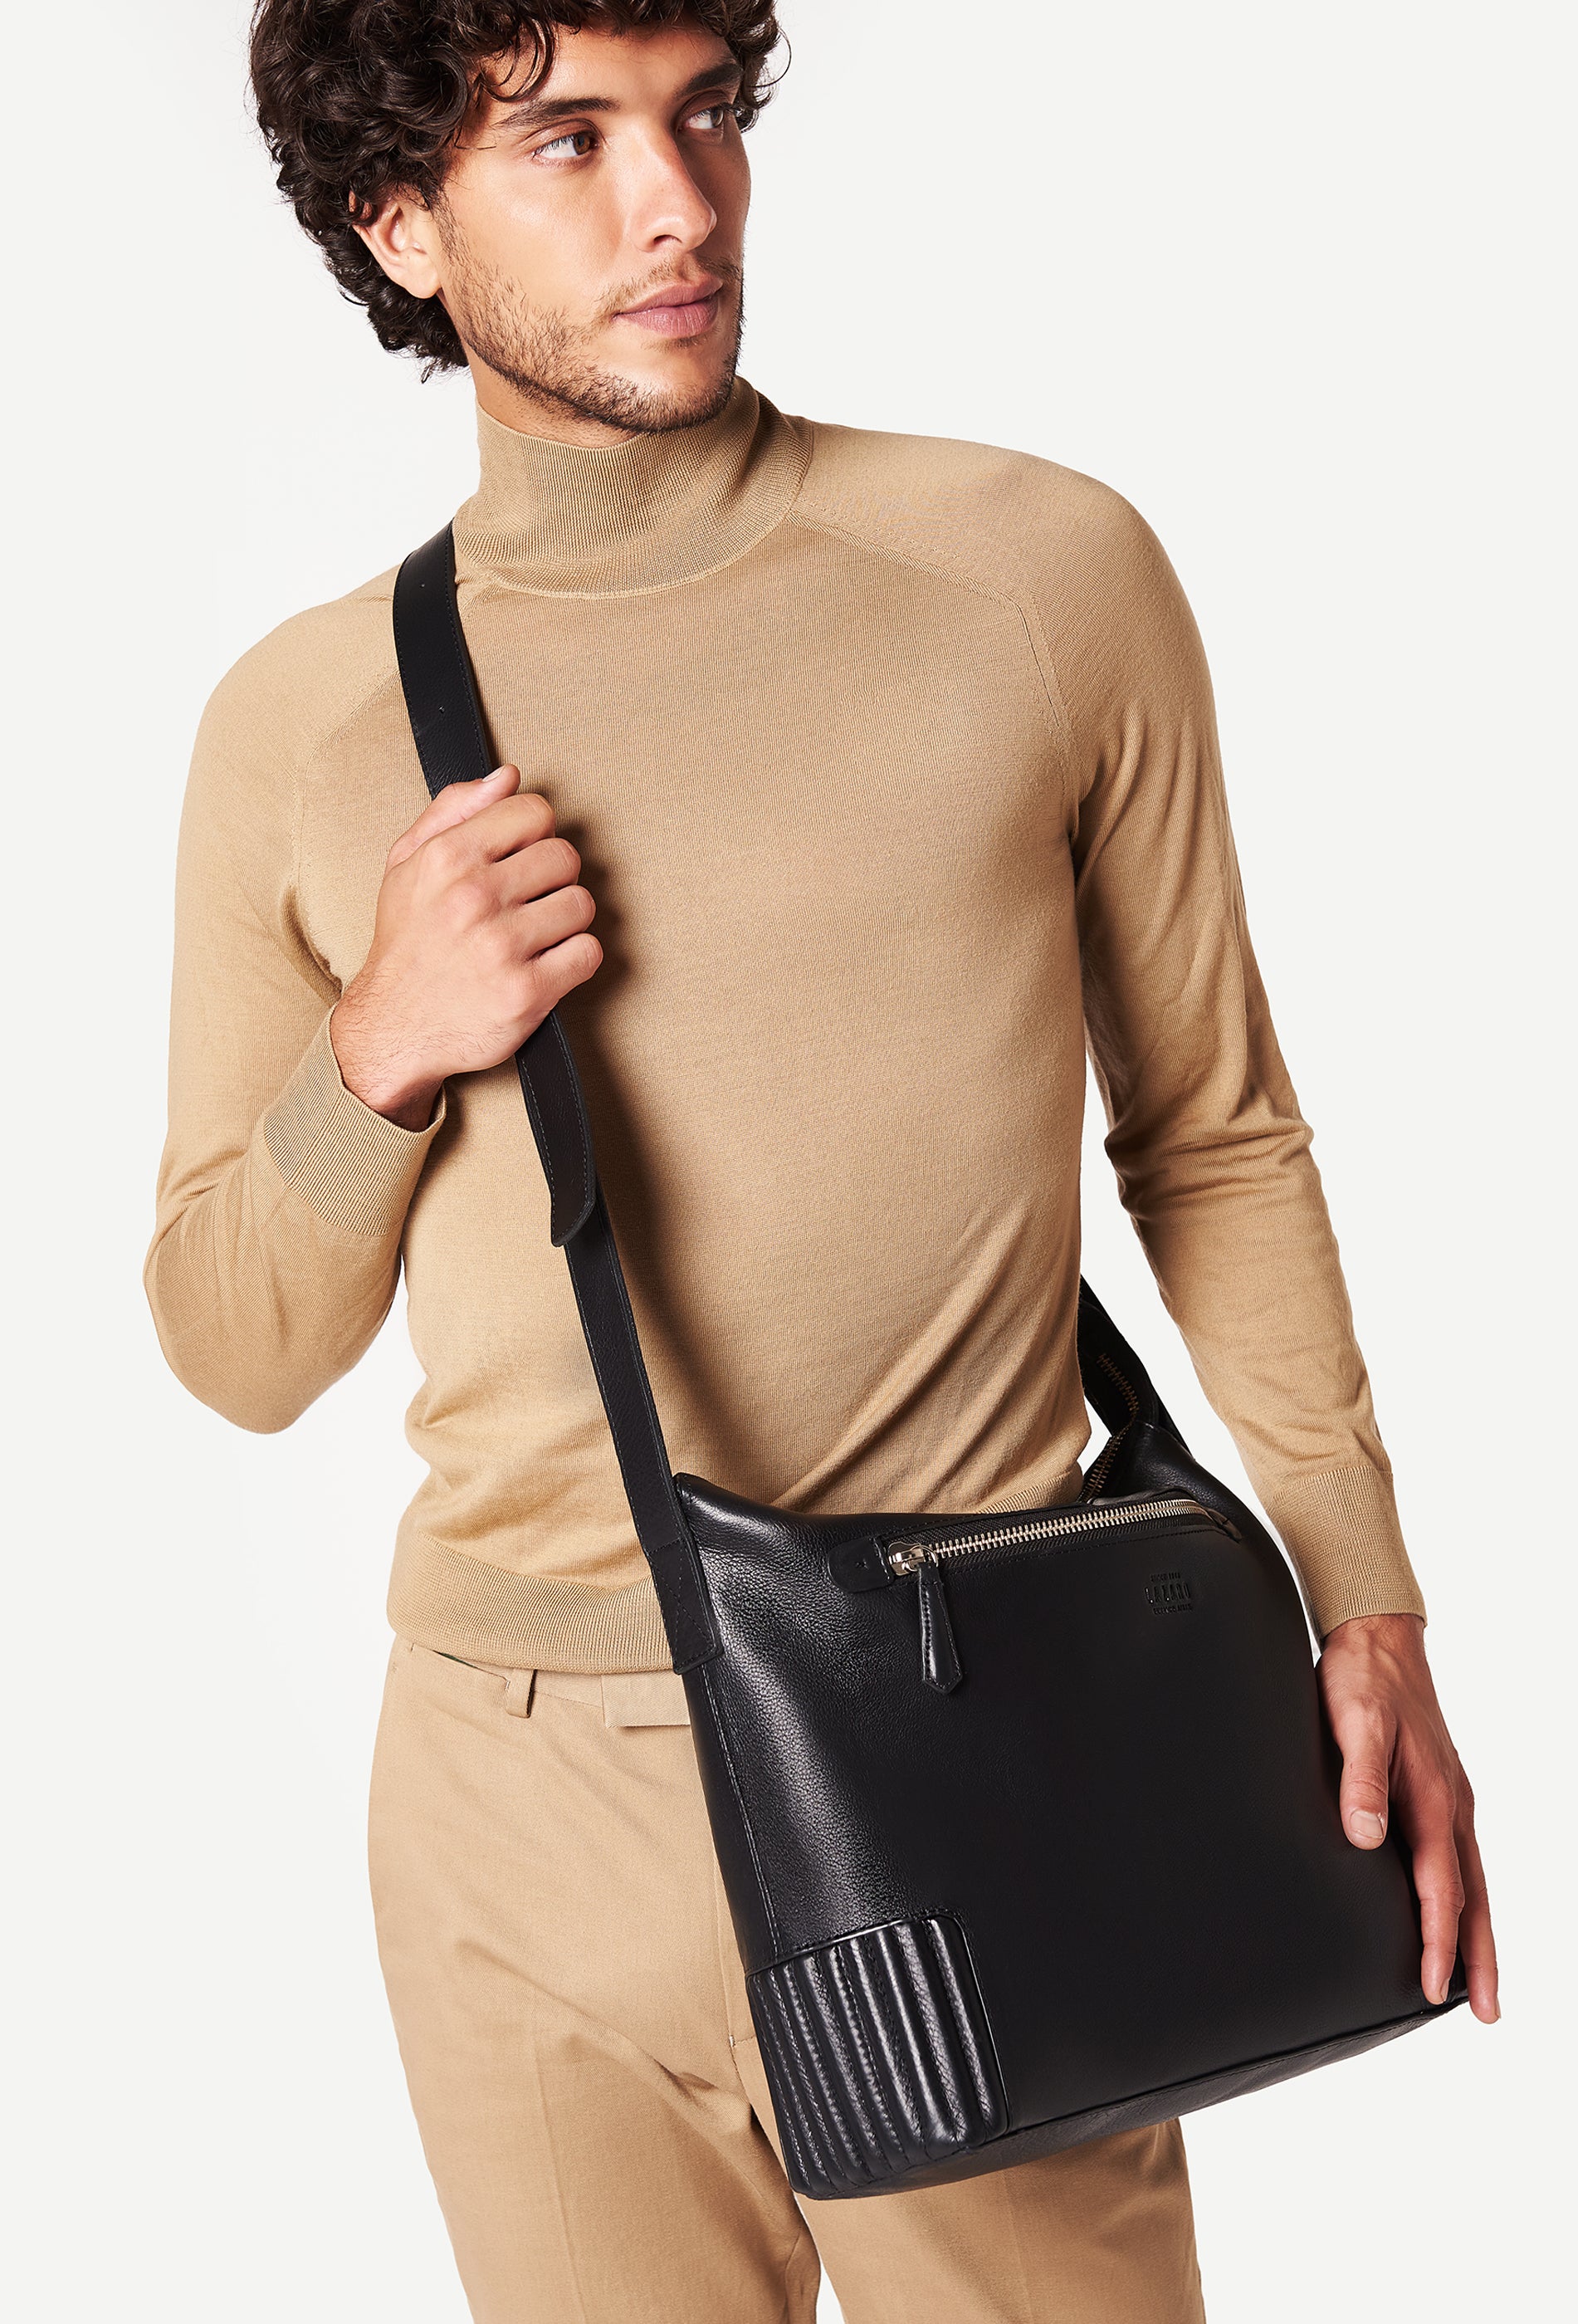 A model carries a sophisticated black leather crossbody messenger, showcasing its sophisticated design. The bag features unique needlework on its side, adding to its elegant appeal. The model confidently displays the bag's size and craftsmanship while exuding a sense of style and elegance.